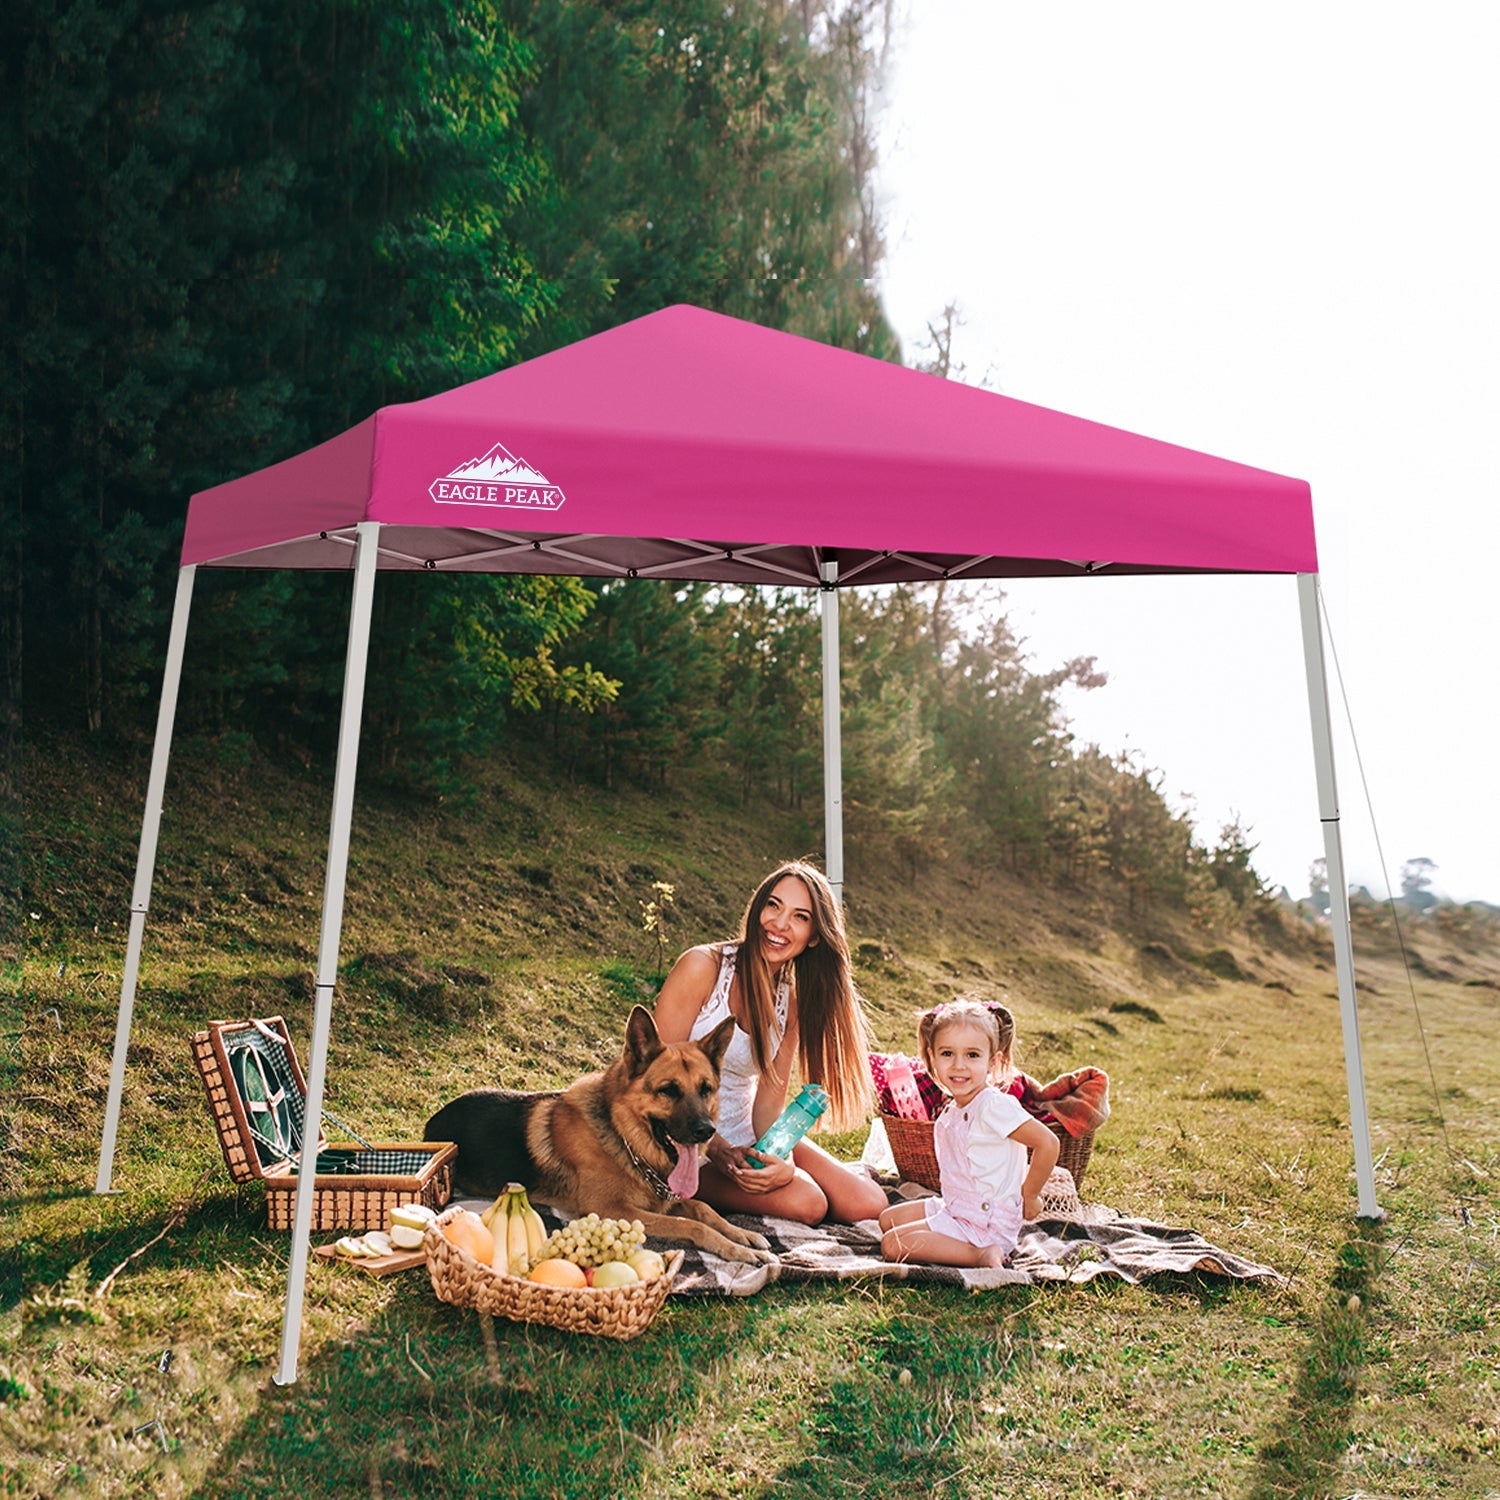 EAGLE PEAK 10' x 10' Slant Leg Pop-up Canopy Tent Easy One Person Setup Instant Outdoor Canopy Folding Shelter with 64 Square Feet of Shade (Pink)